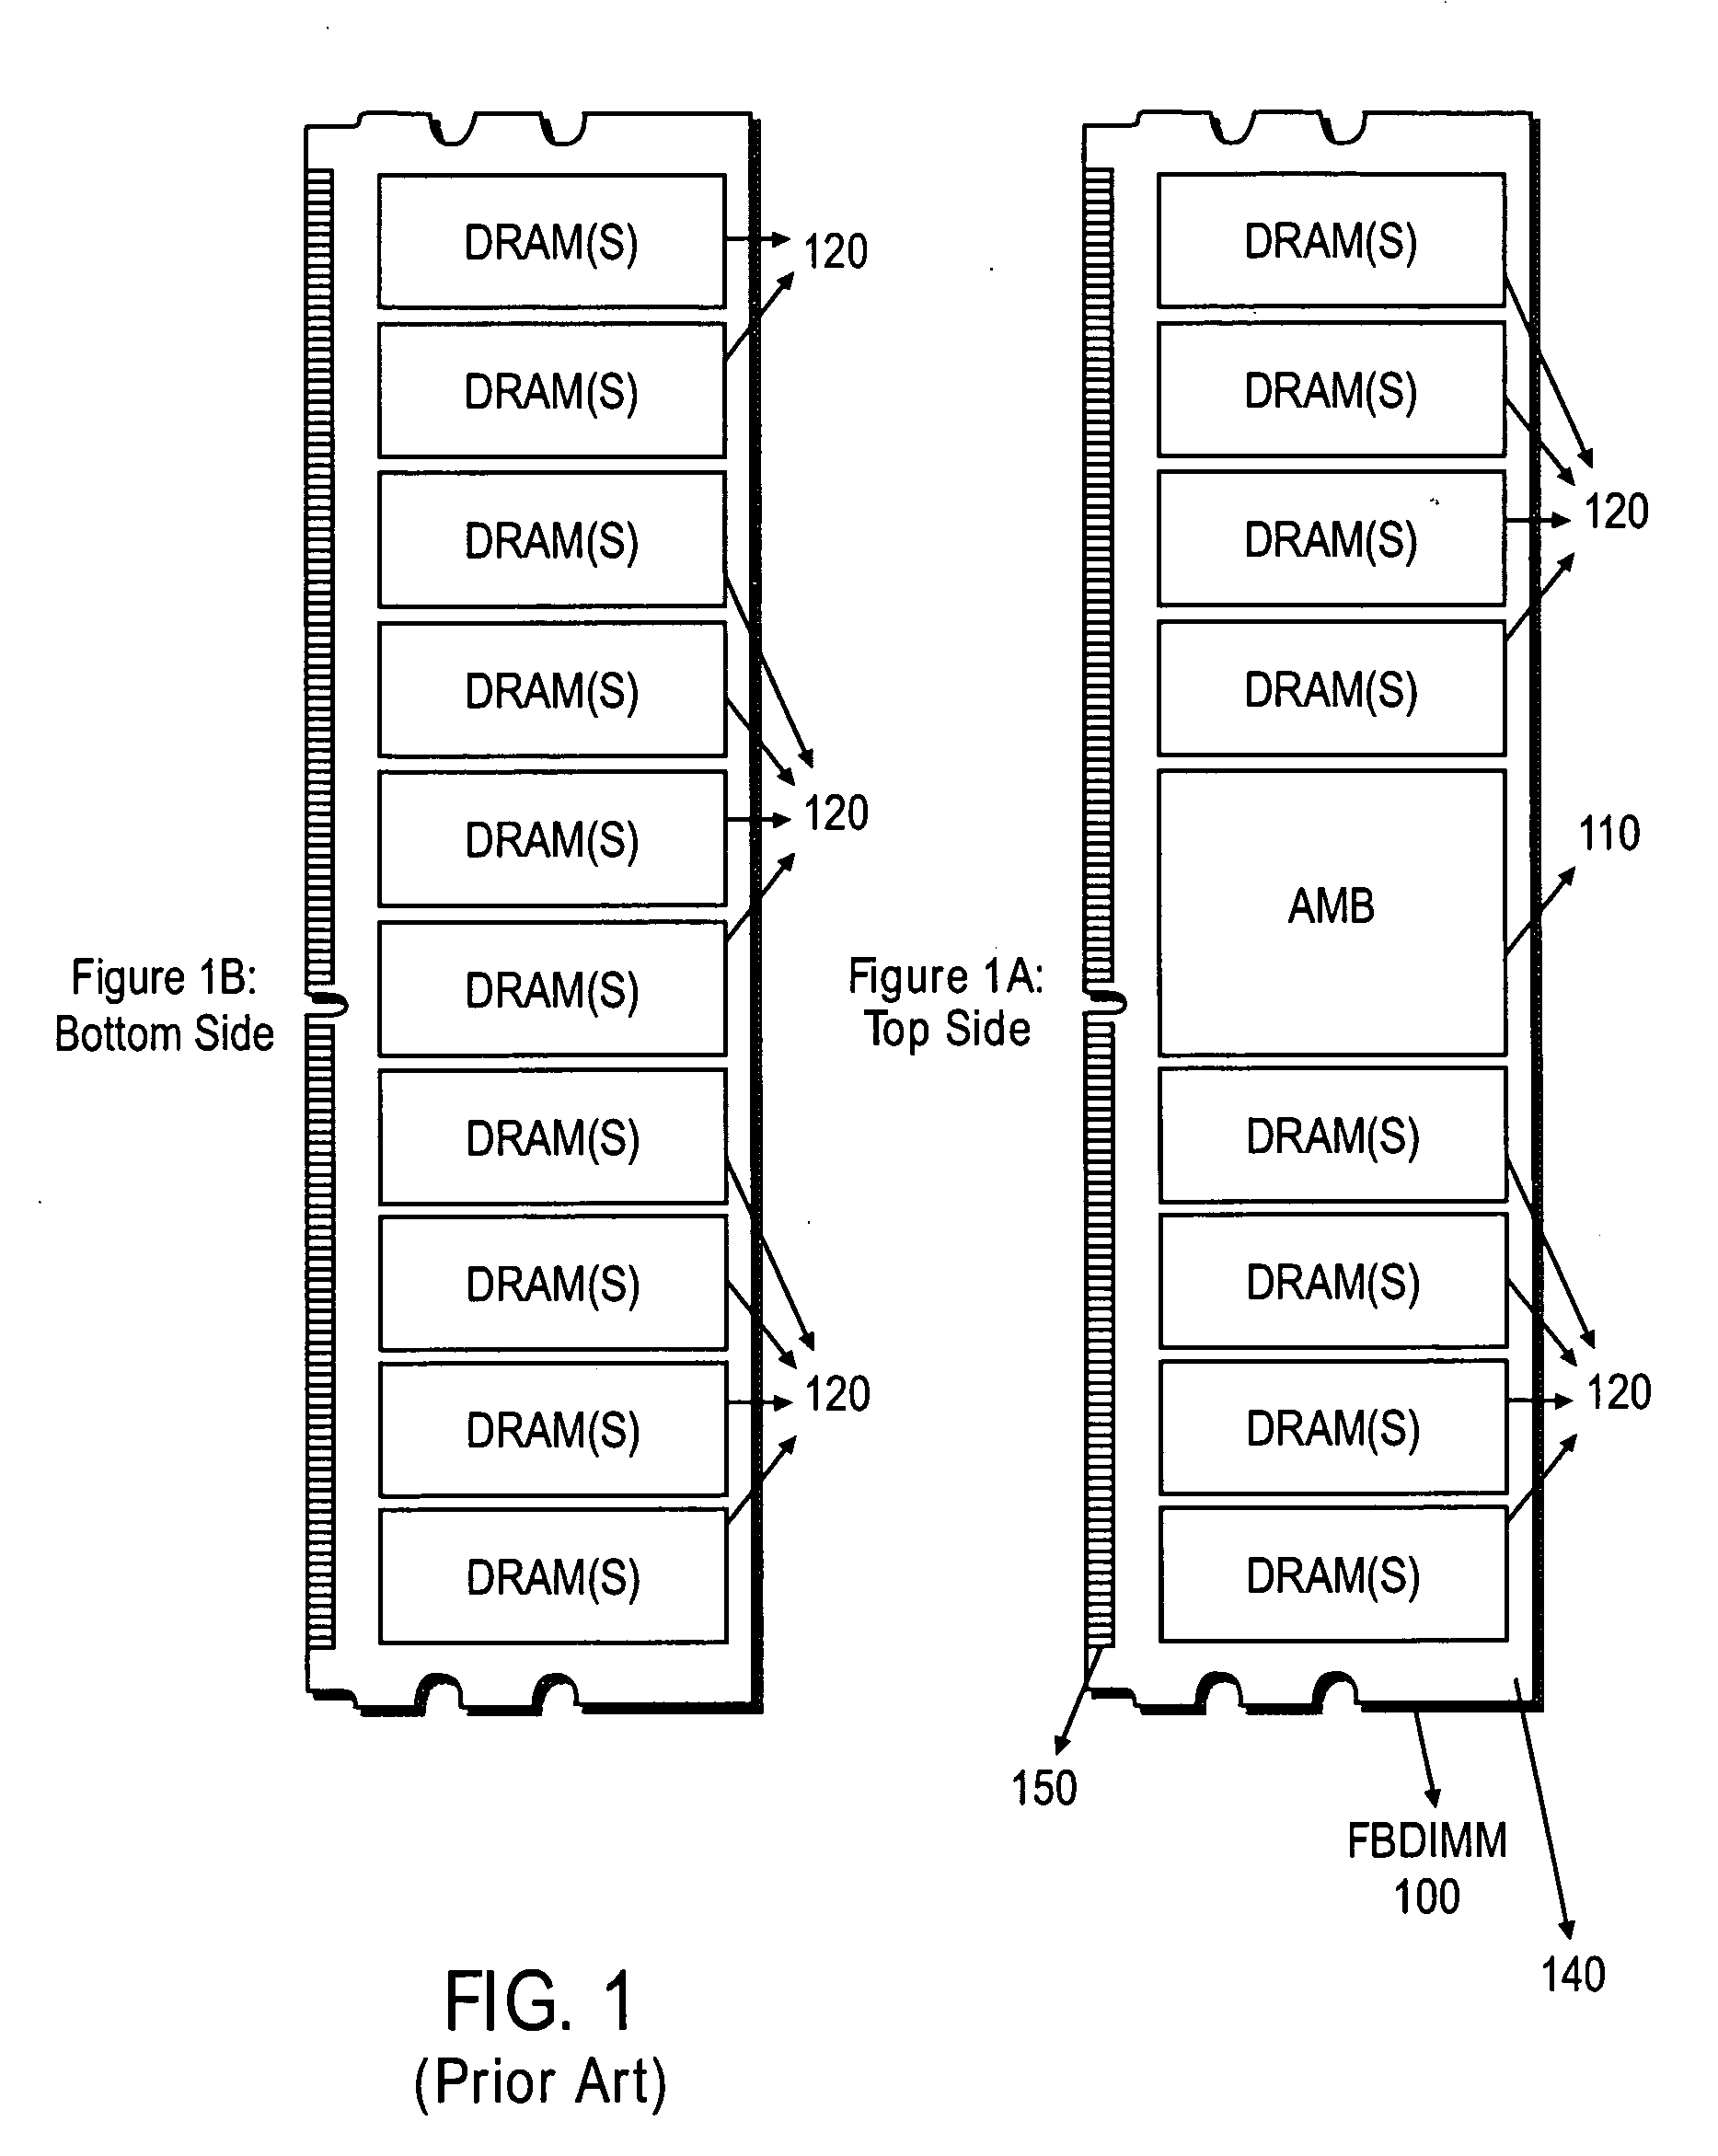 Memory supermodule utilizing point to point serial data links